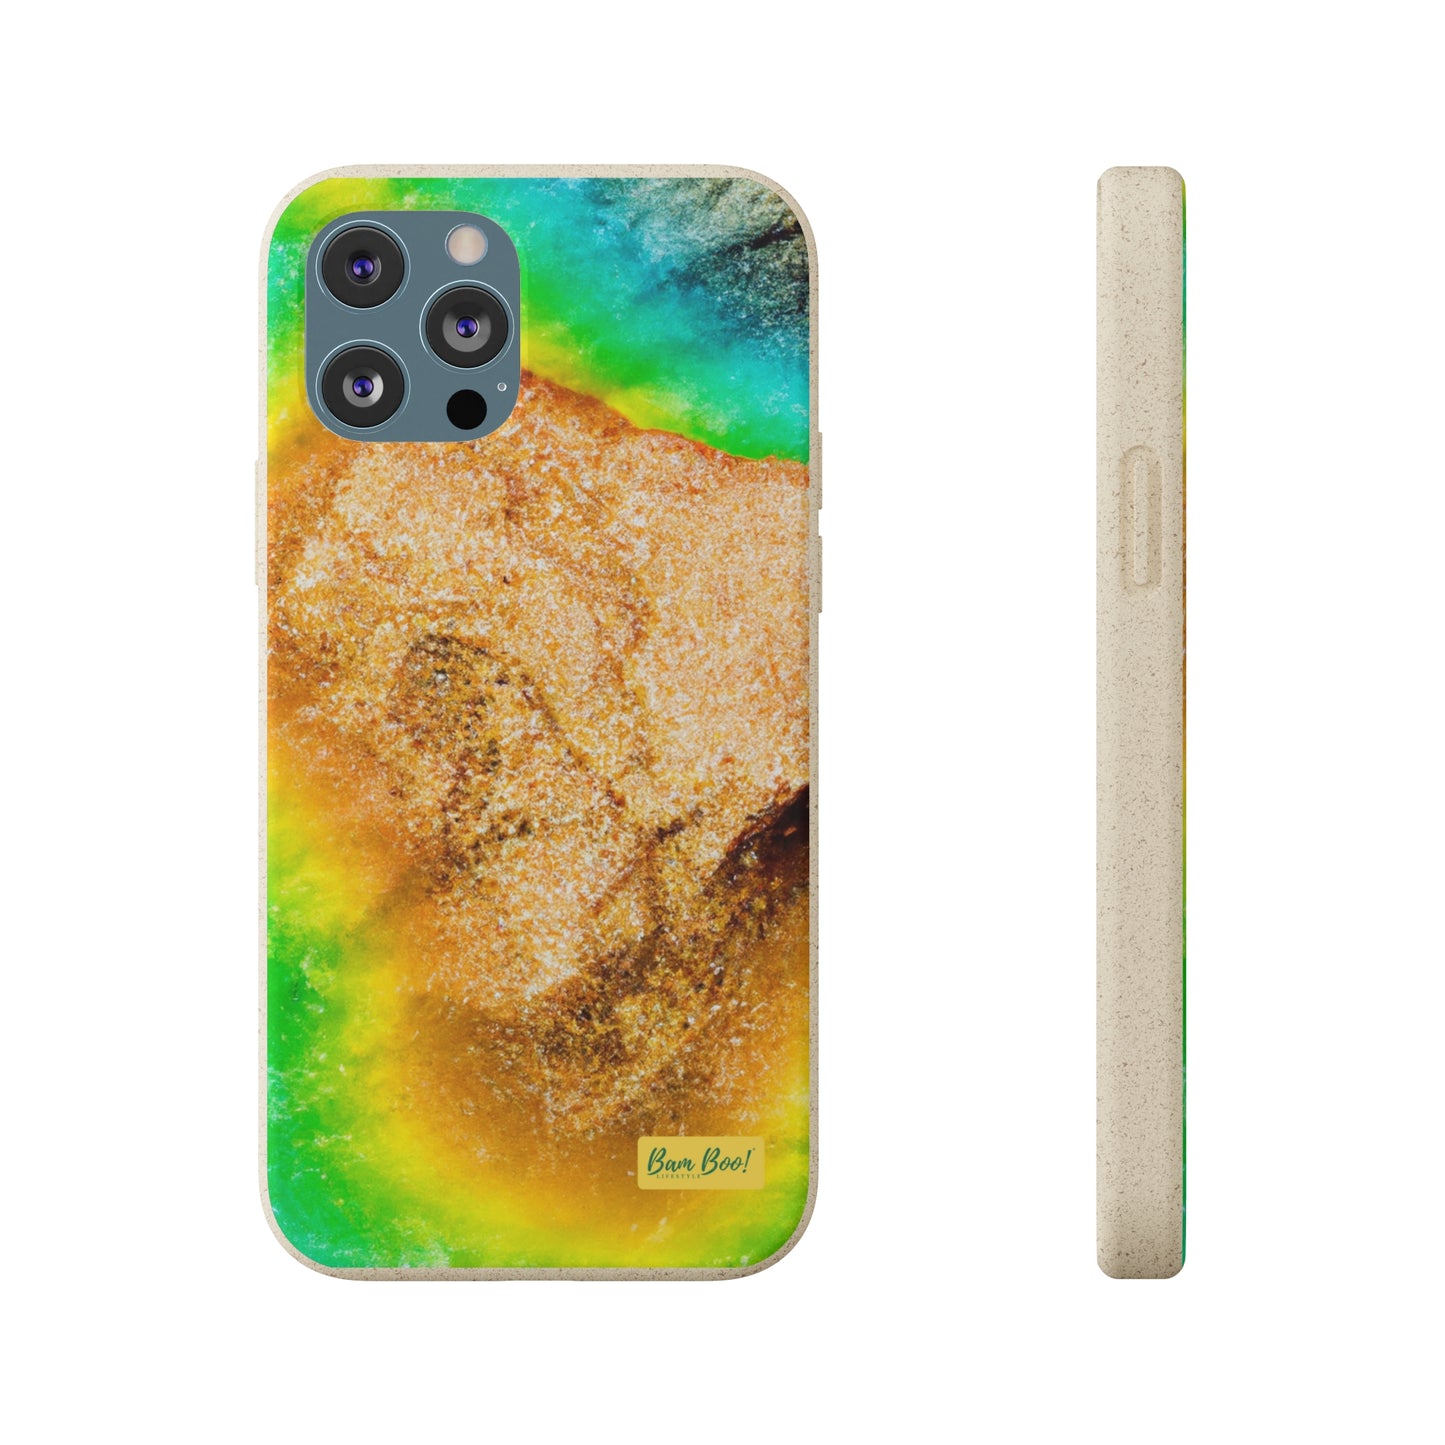 "Fusing Photography and Color: Creative Visuals Unleashed!" - Bam Boo! Lifestyle Eco-friendly Cases